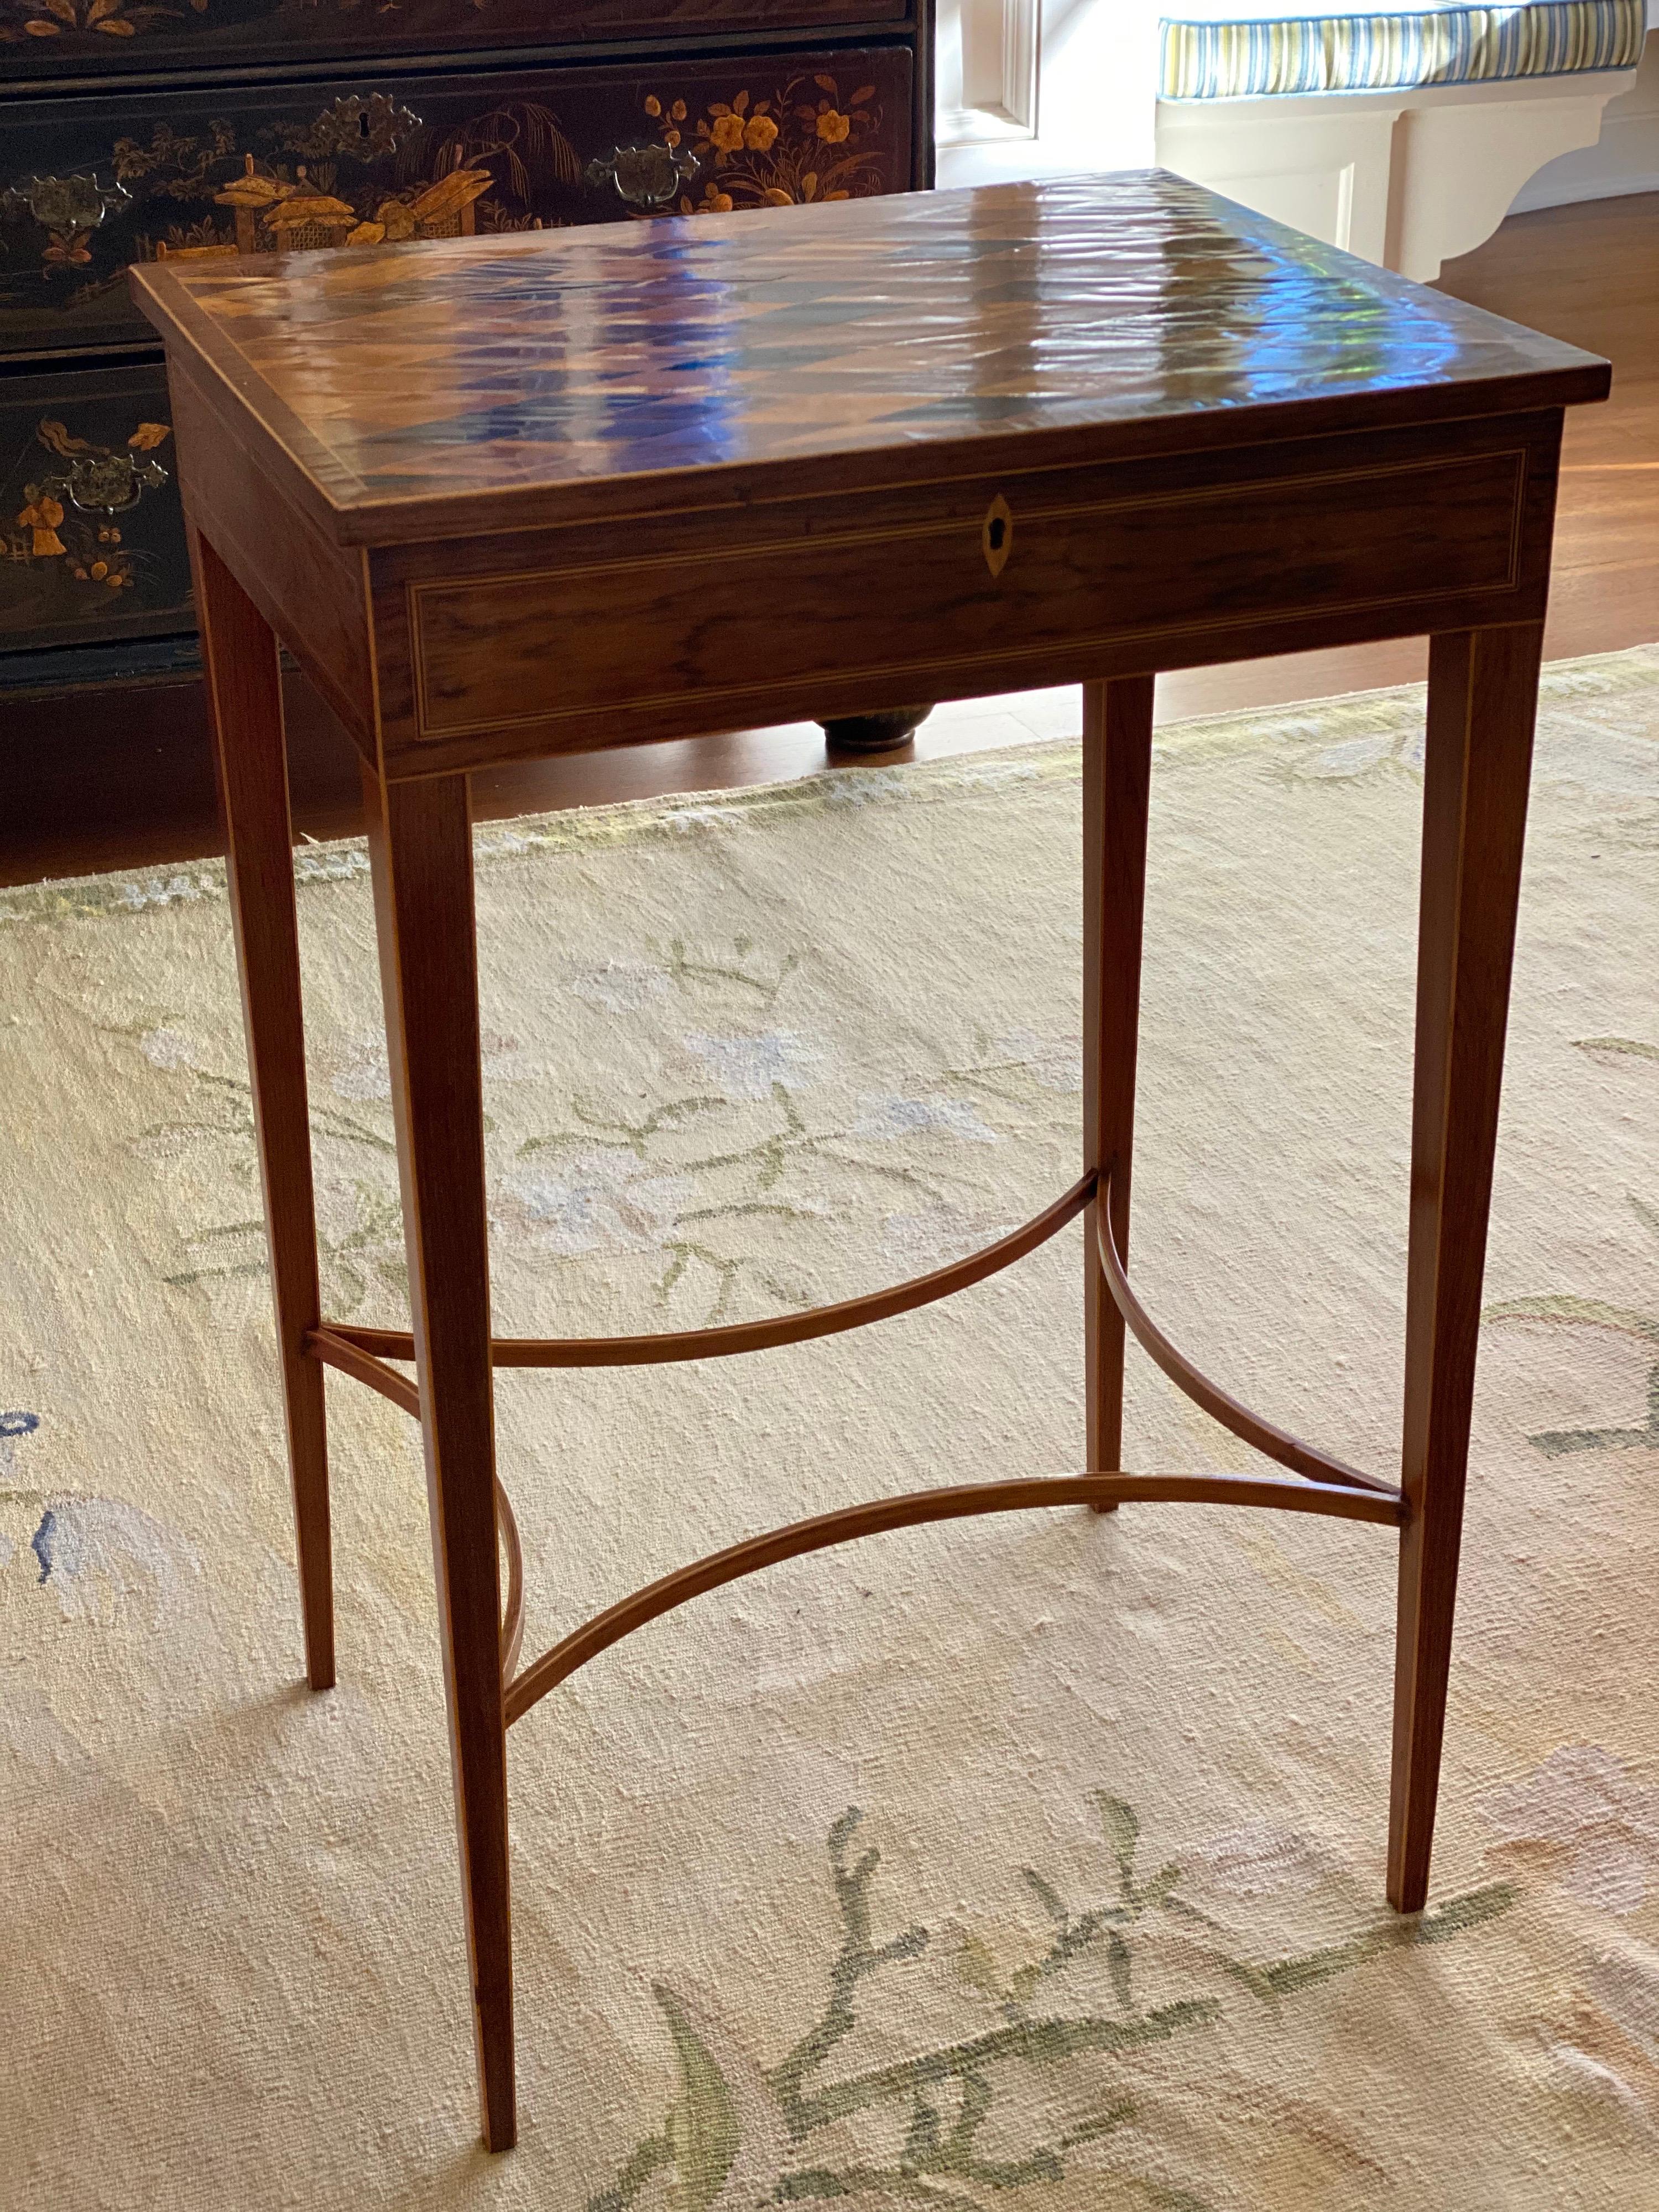 19th Century Unusual George III Inlaid Rosewood and Specimen Wood Parquetry Work Table For Sale